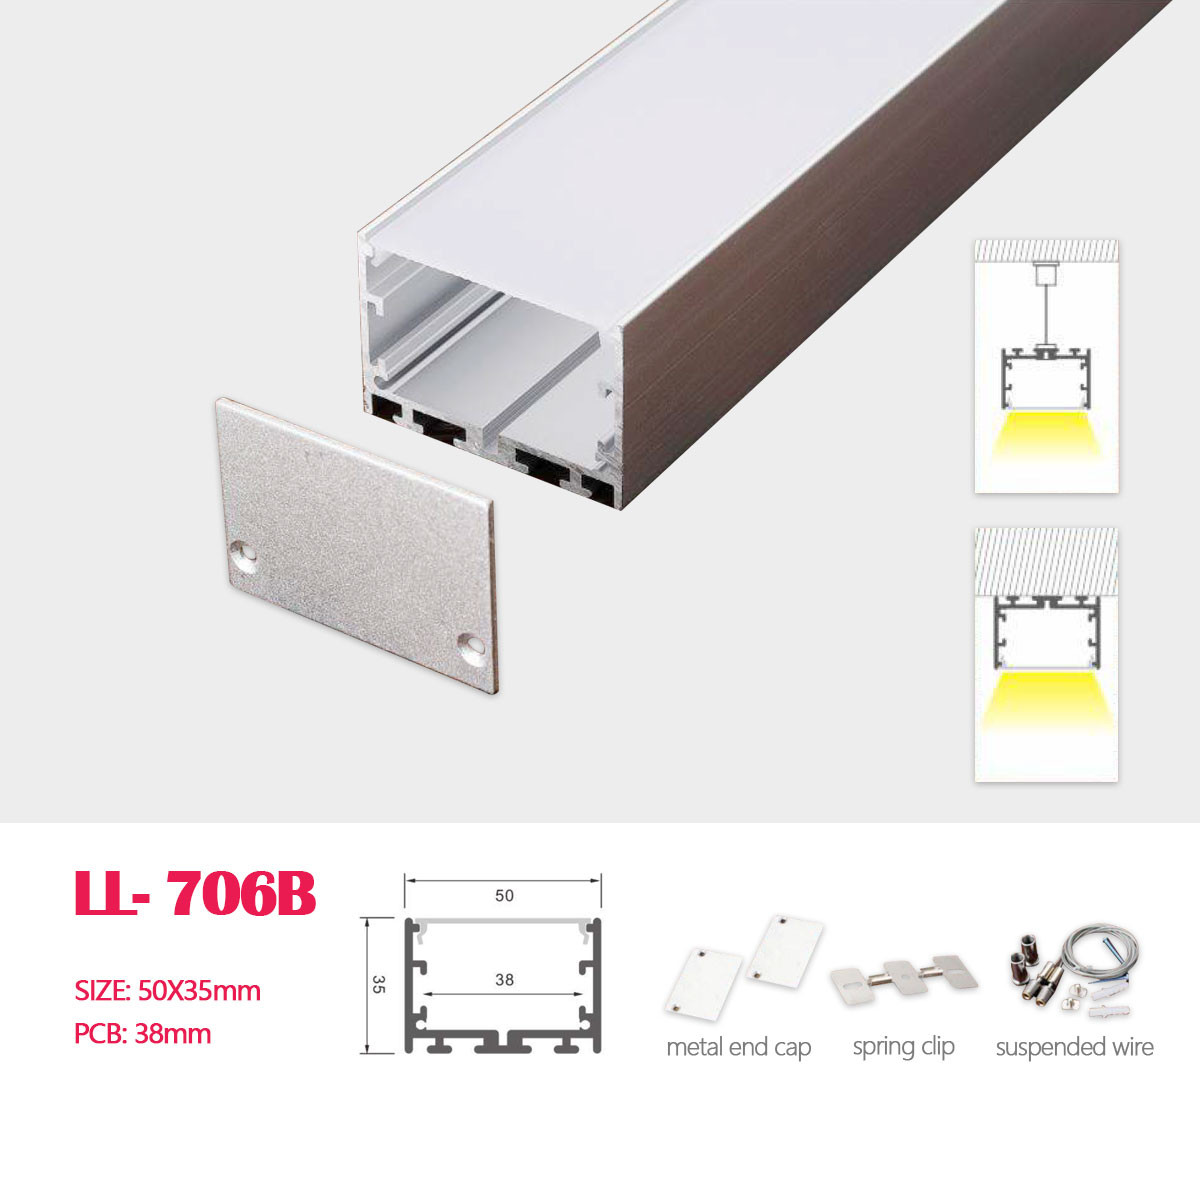 1M (3.28FT) 50MM*35MM Square Aluminum Profile with Flat Cover, Metal End Cap and Suspension wire for hanging or Surface Mounted Led Strips Lighting installation